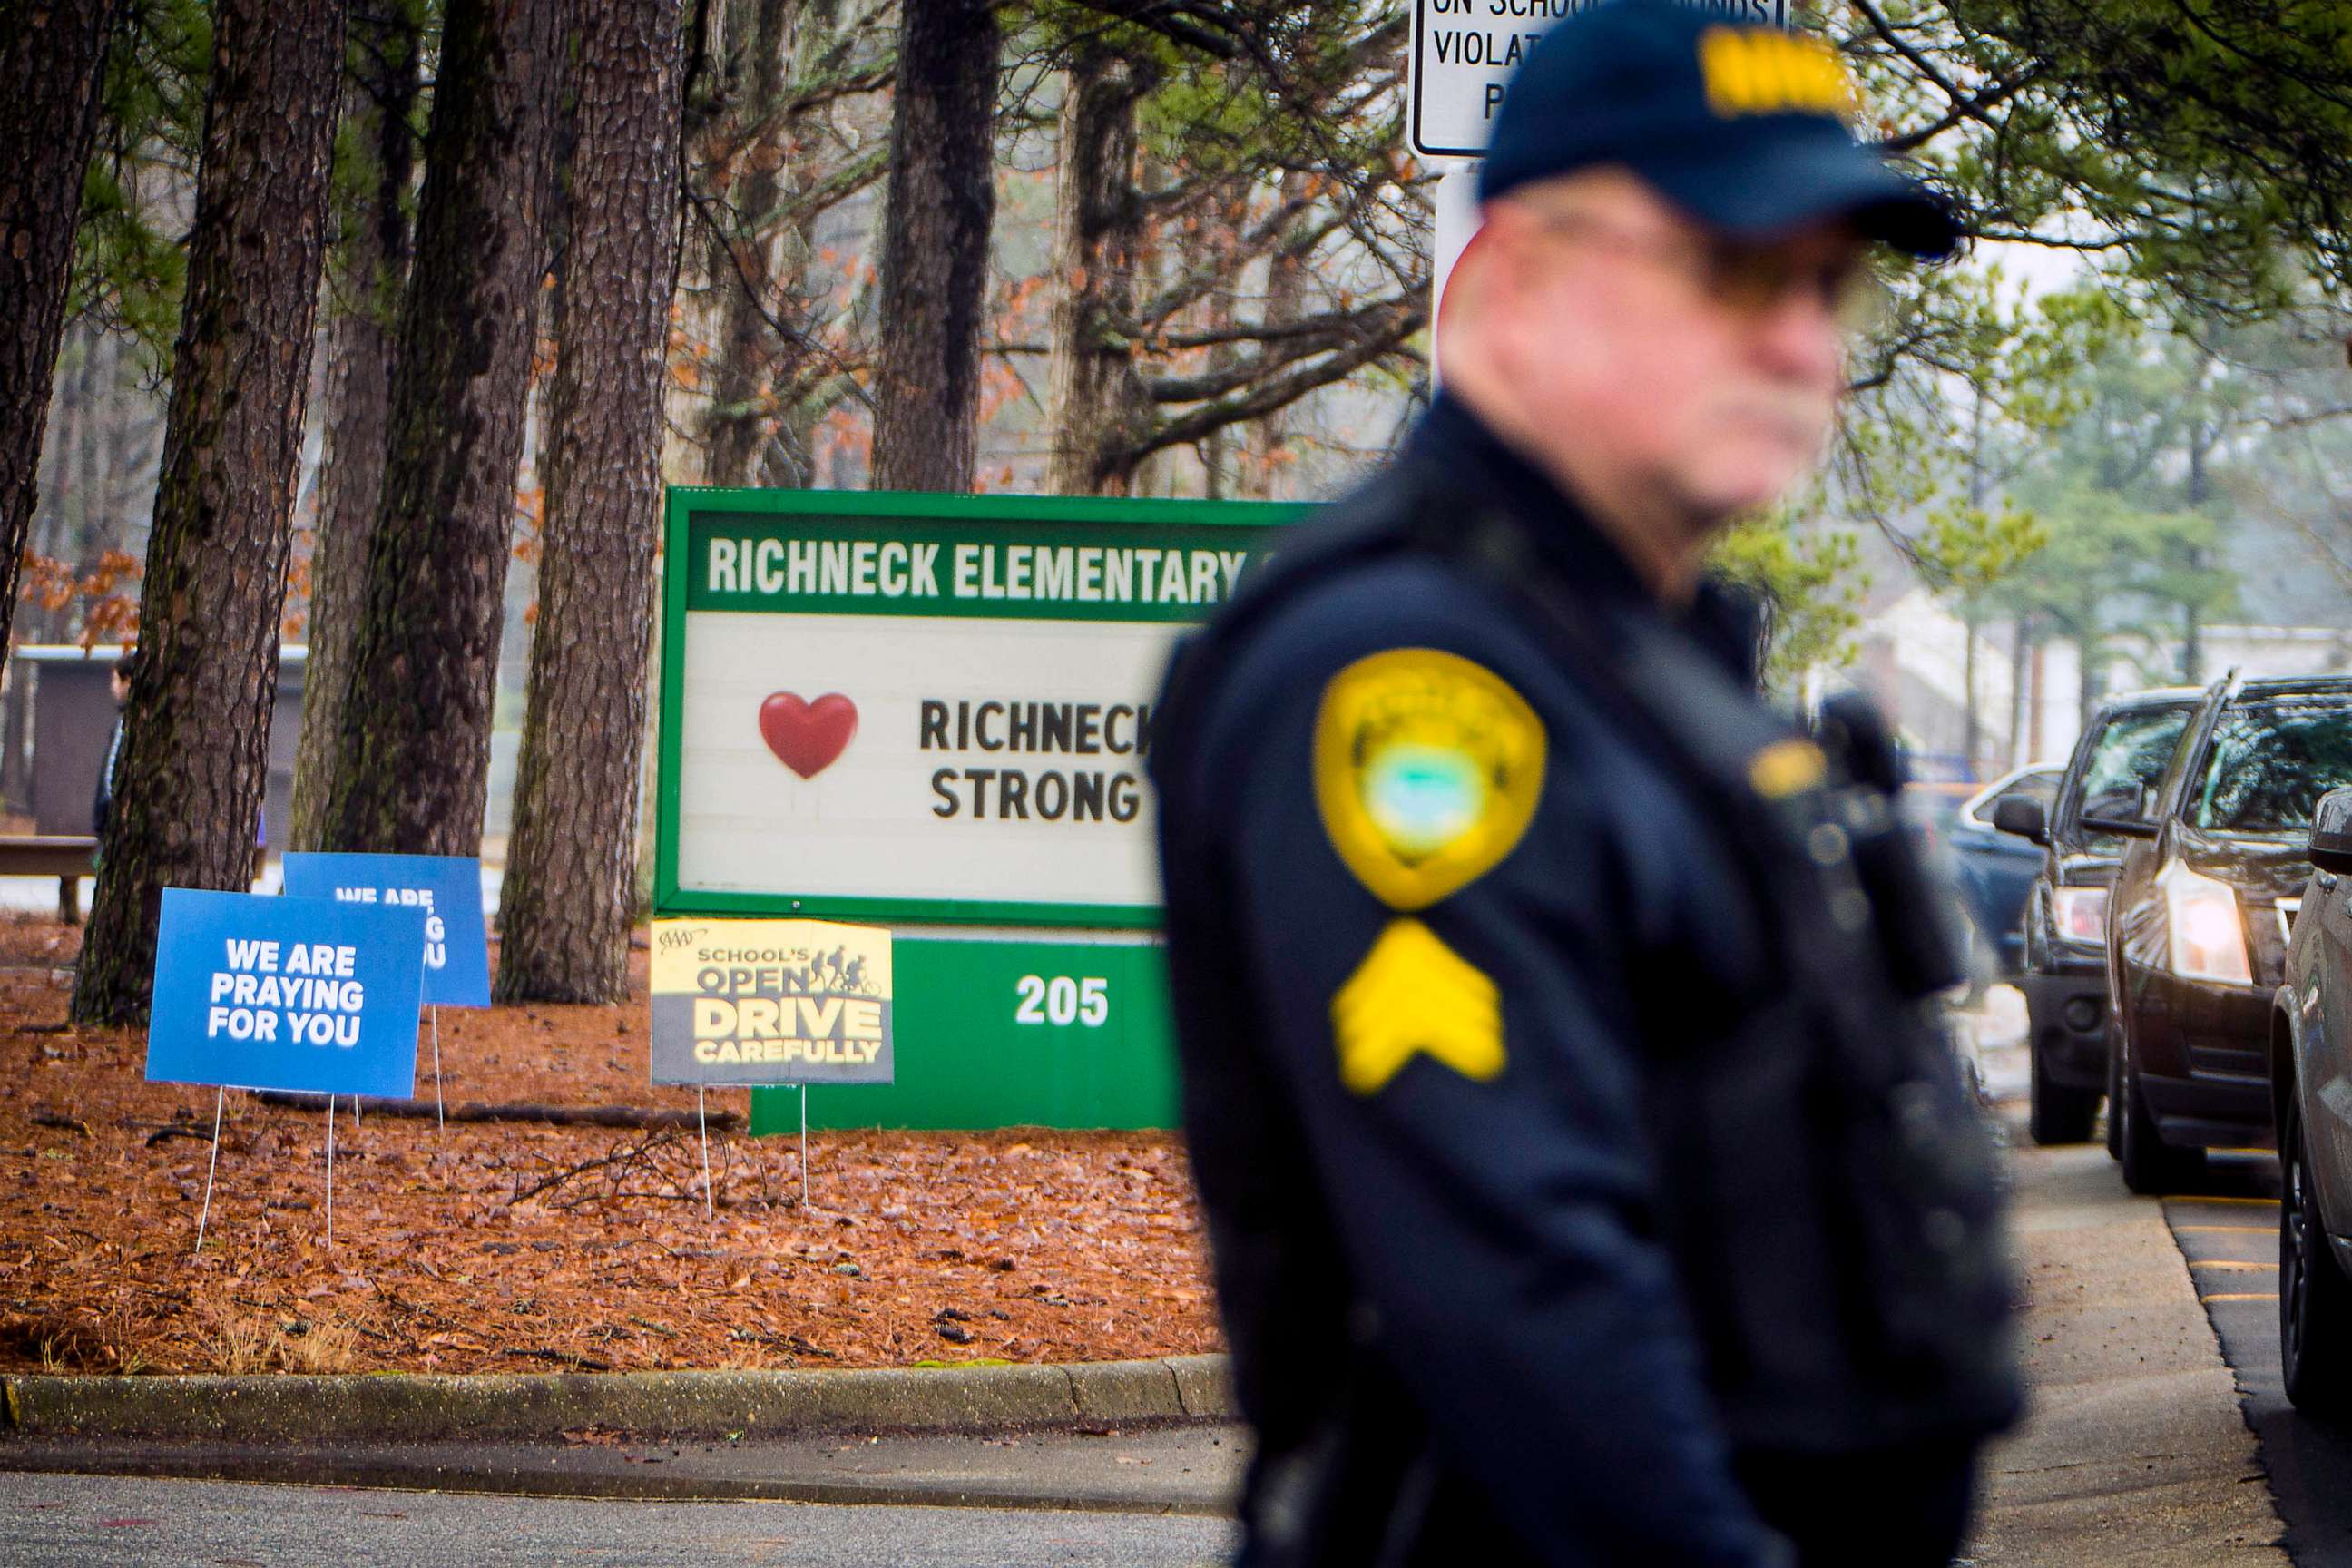 PHOTO: FILE - A Newport News police officer directs traffic at Richneck Elementary School in Newport News, Va., Jan. 30, 2023.